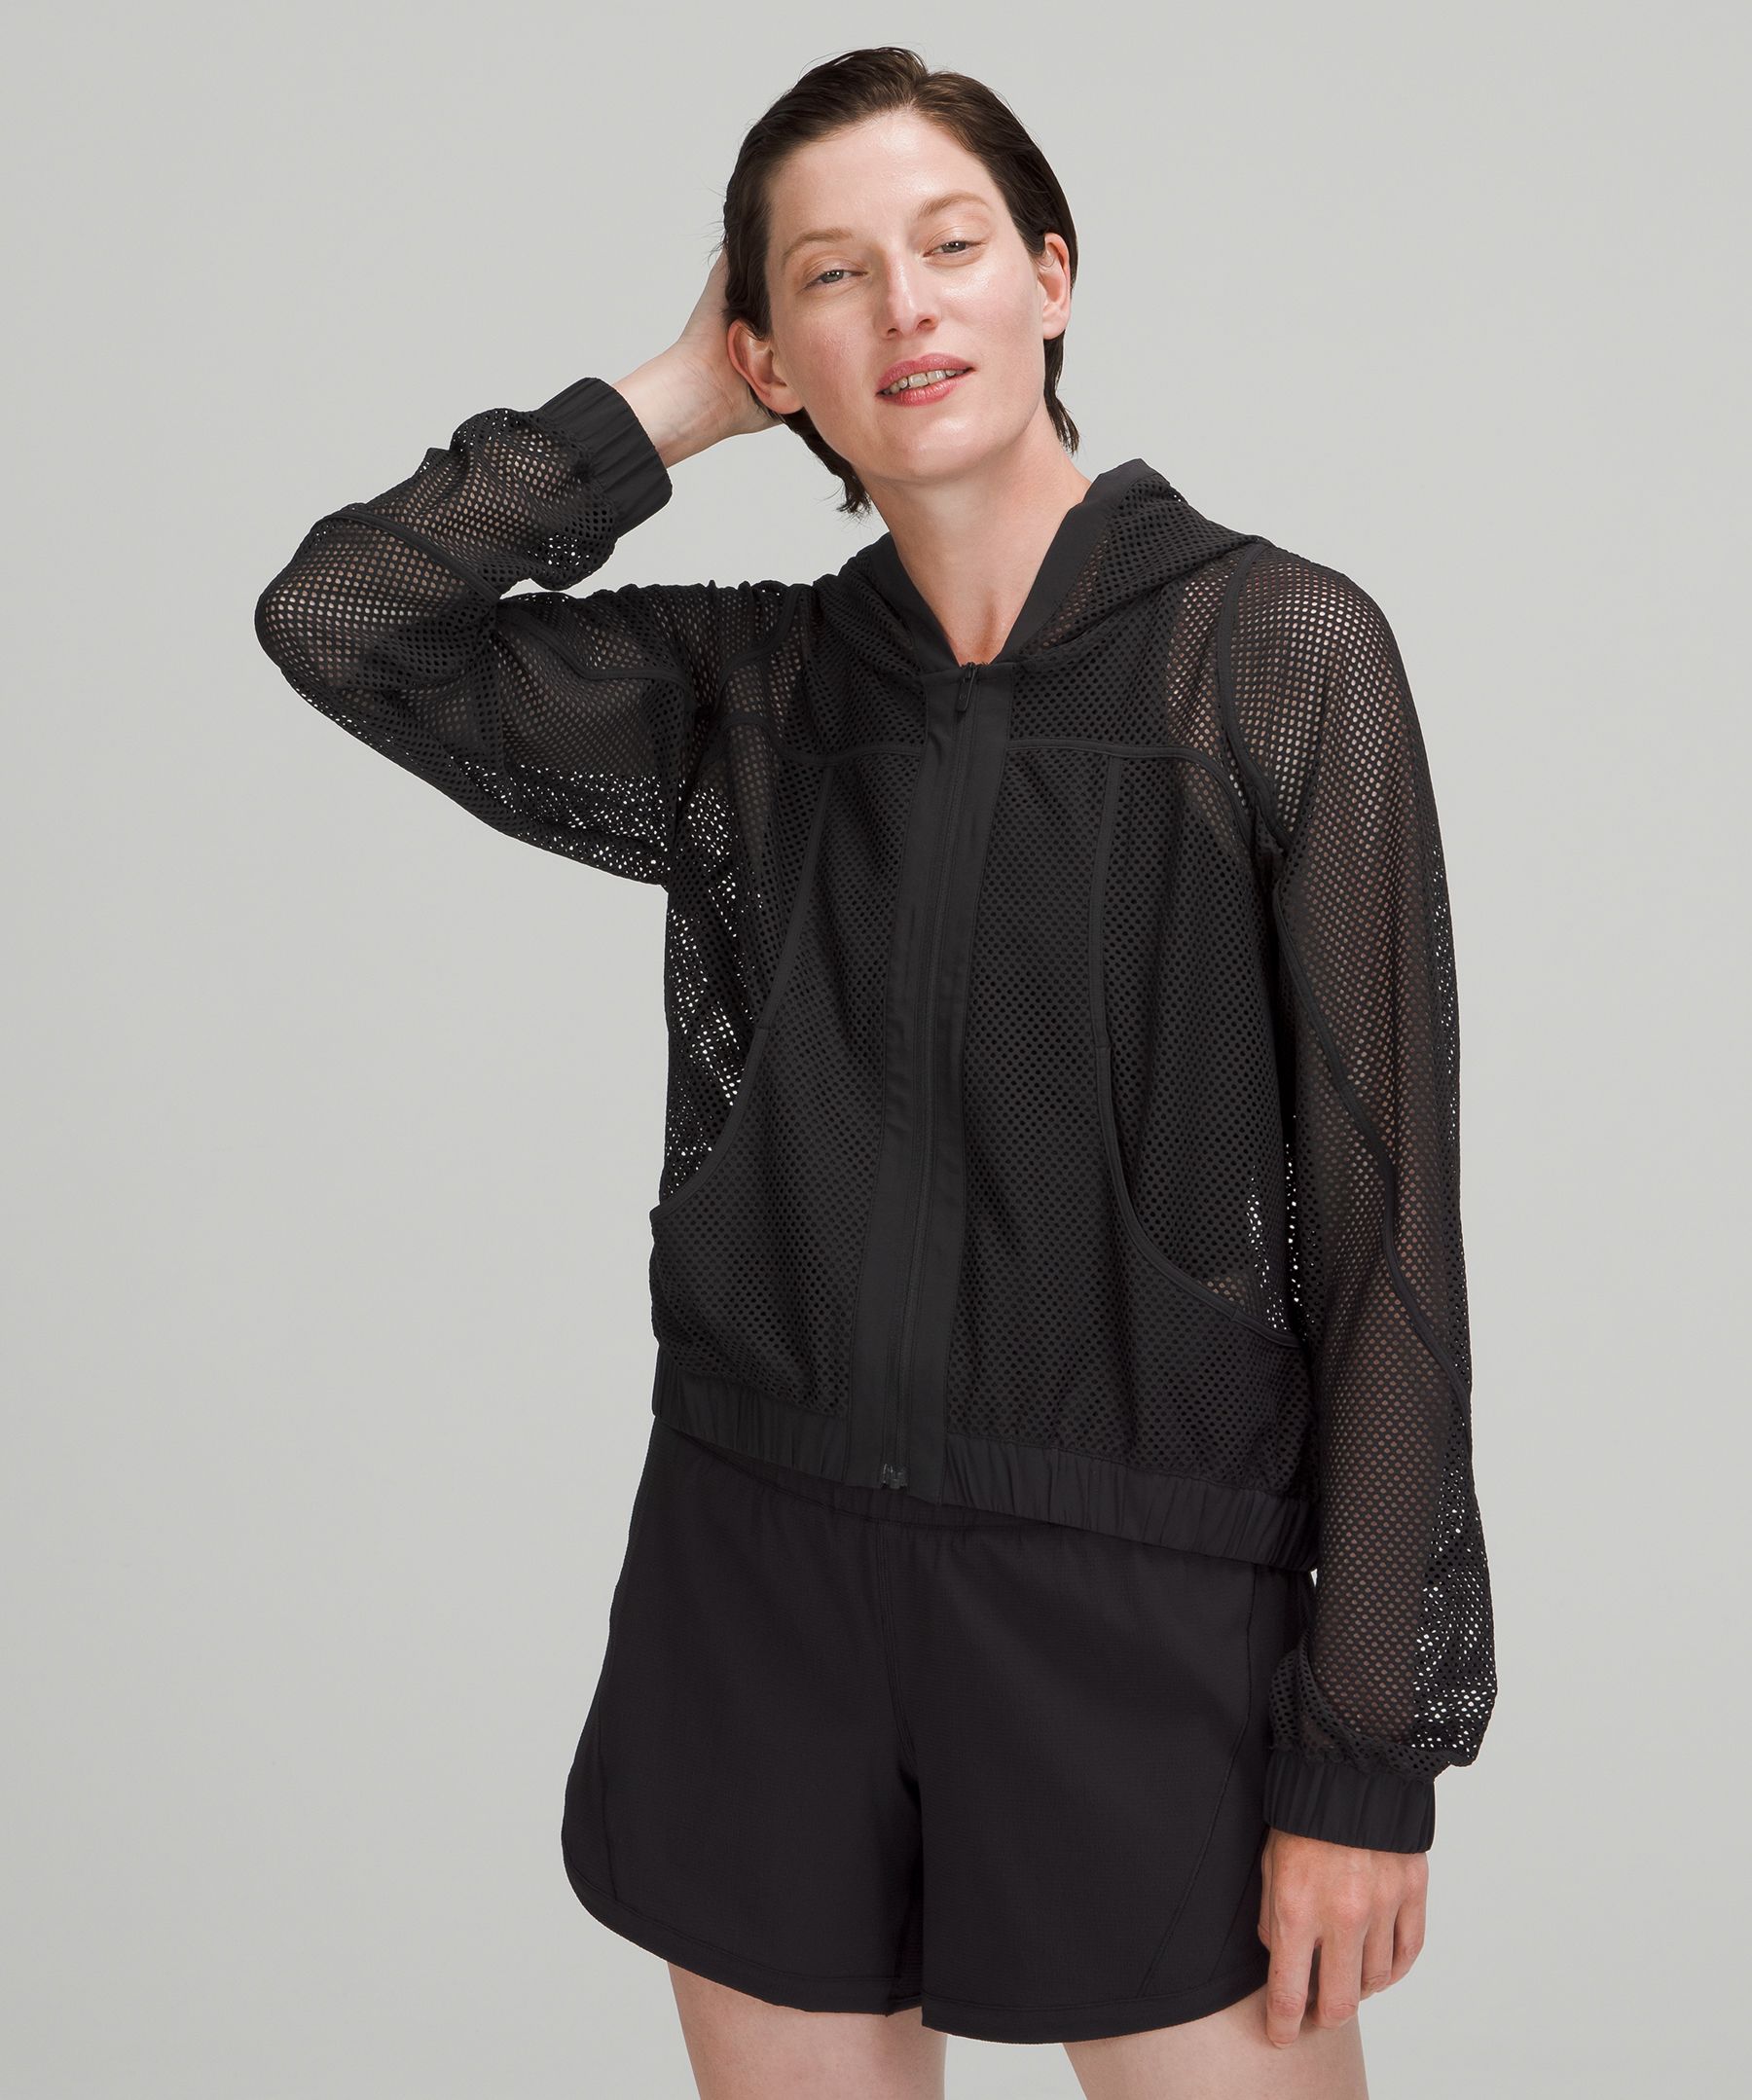 lululemon athletica Relaxed Athletic Jackets for Women